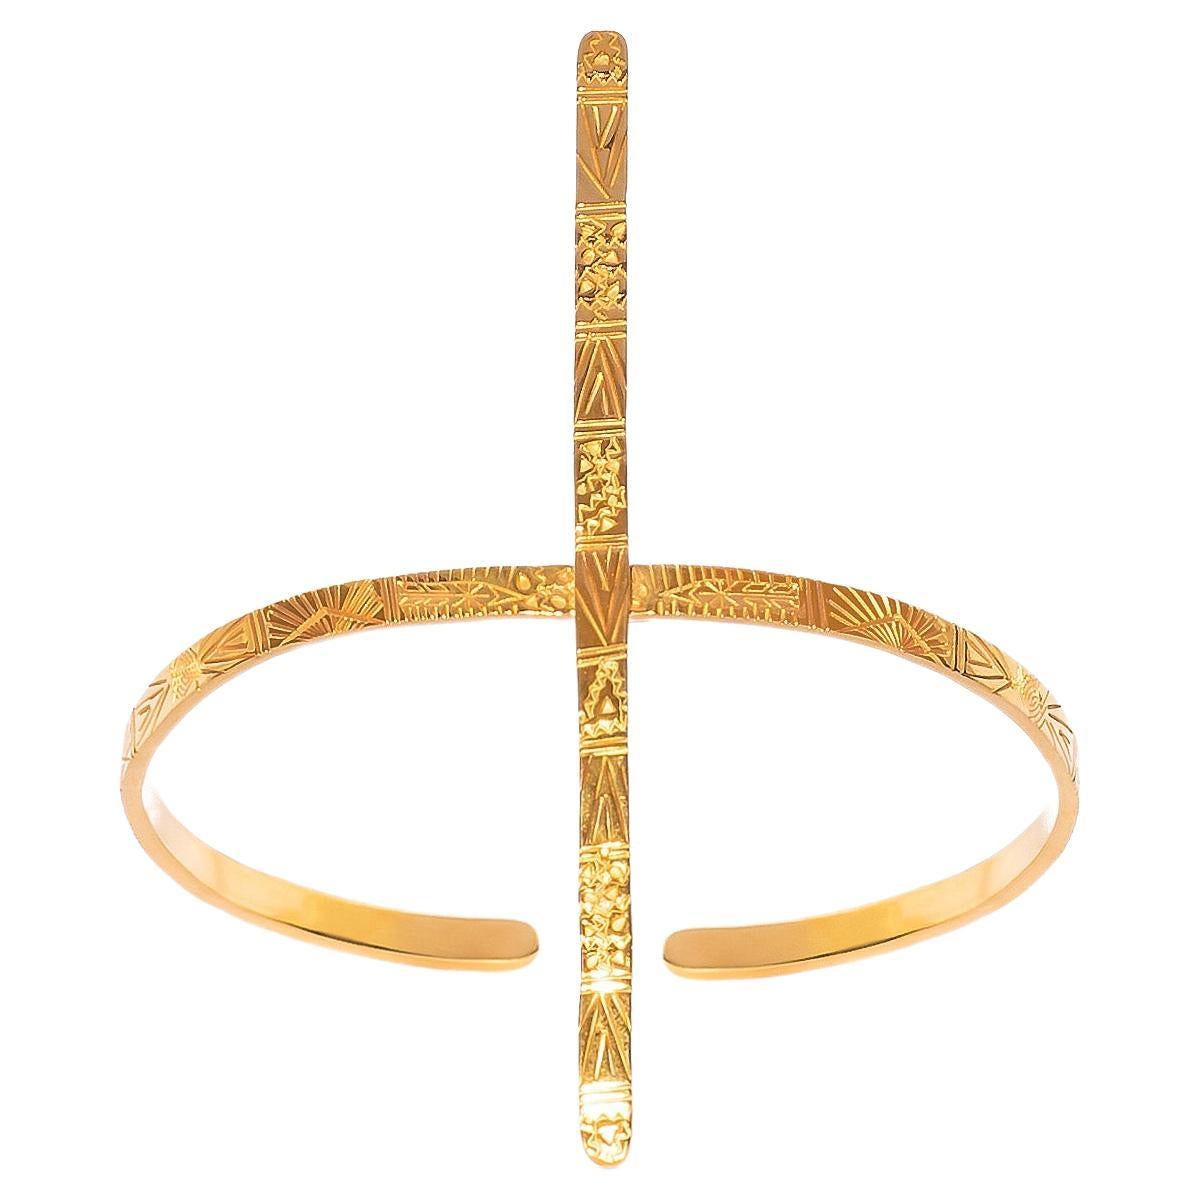 Artemisa Armlet in 14k Yellow Gold: Contemporary Ancient Egyptian Elegance